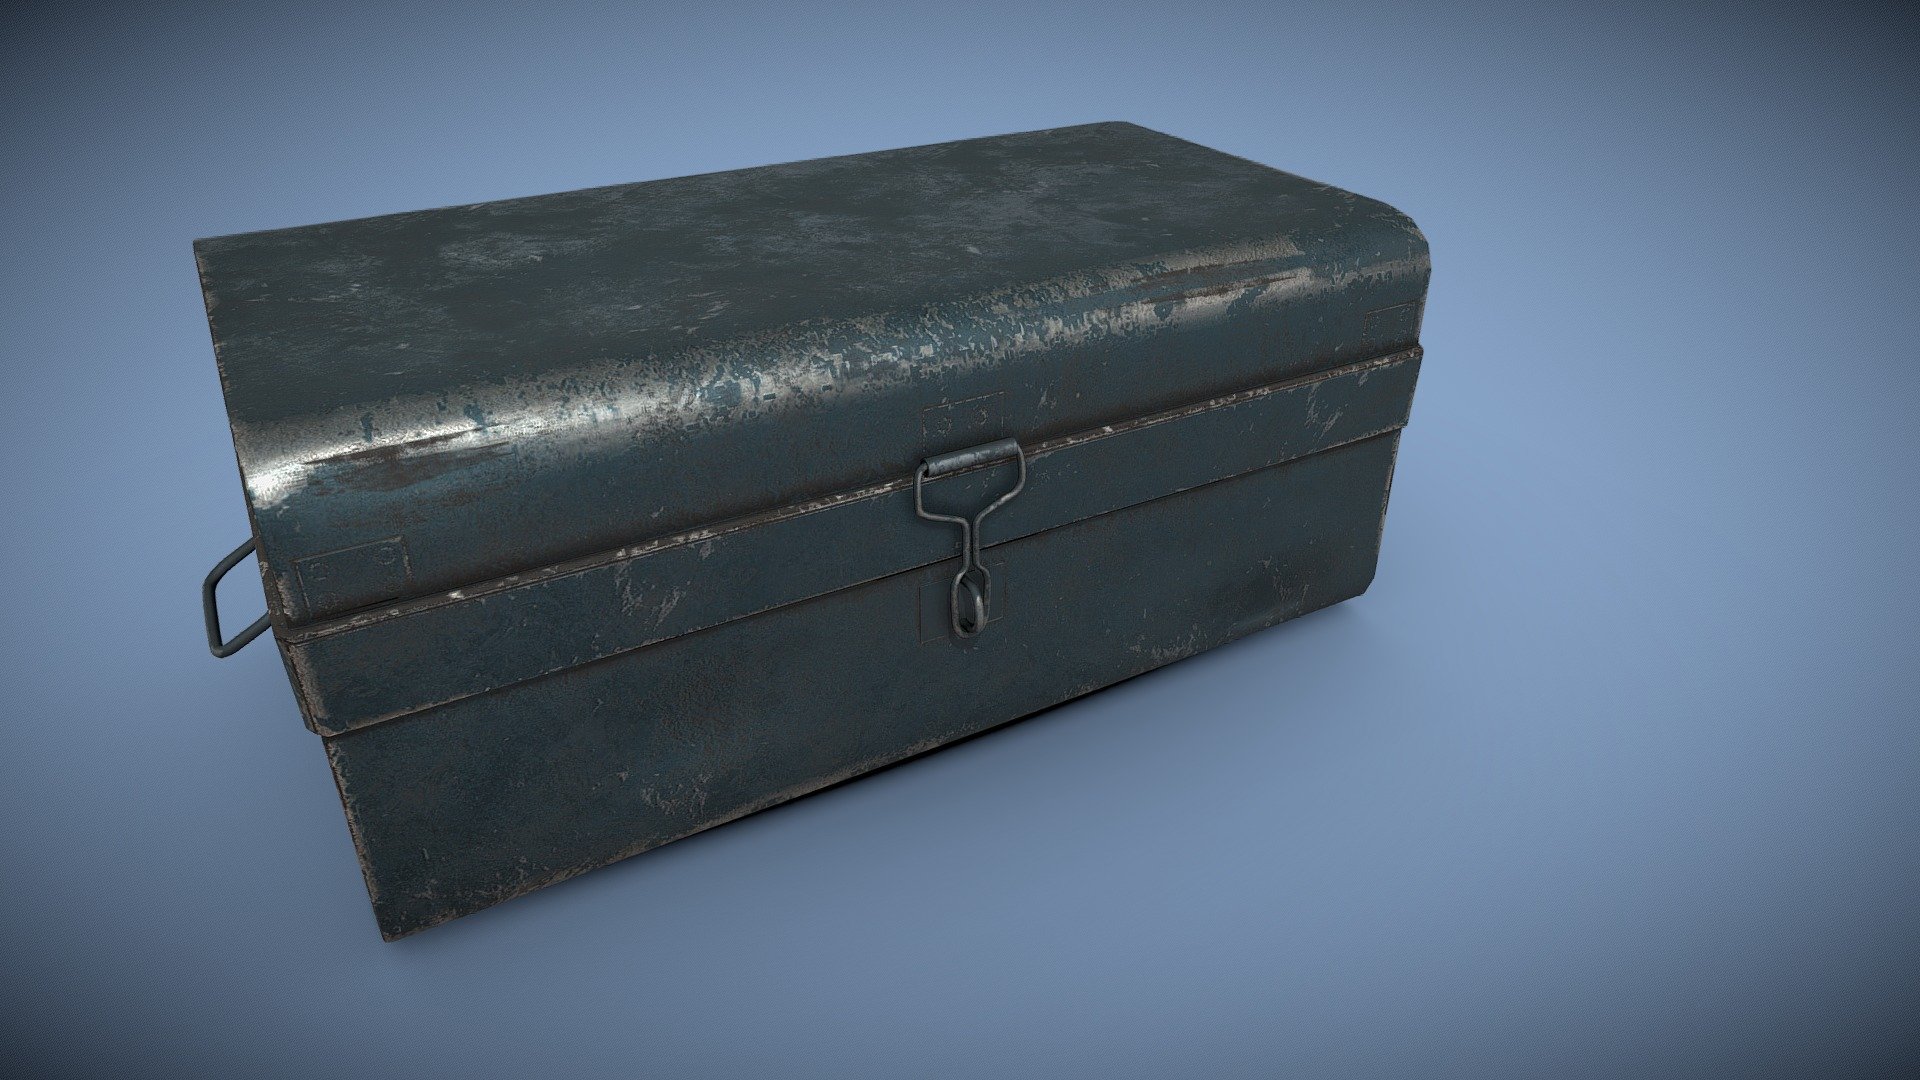 This high-quality 3D model portrays an iron trunk box, a timeless and robust storage solution that combines vintage charm with durability. The model authentically captures the physical design and details of a classic iron trunk box.

The exterior of the iron trunk box is faithfully reproduced in the model, showcasing the rugged iron construction that provides exceptional strength and longevity

Upon opening the trunk, the interior reveals ample storage space. The model accurately represents the inside of the trunk, which may include a lined interior, compartments, or storage trays, depending on the 
Whether you need it for historical recreations, interior design visualizations, or any other creative endeavor, 

Note: Please remember to respect intellectual property rights and ensure you have the necessary permissions to use and distribute any 3D models or designs based on copyrighted products like iron trunk boxes - Iron trunk box - Buy Royalty Free 3D model by Sujit mishra (@sujitanshumishra) 3d model